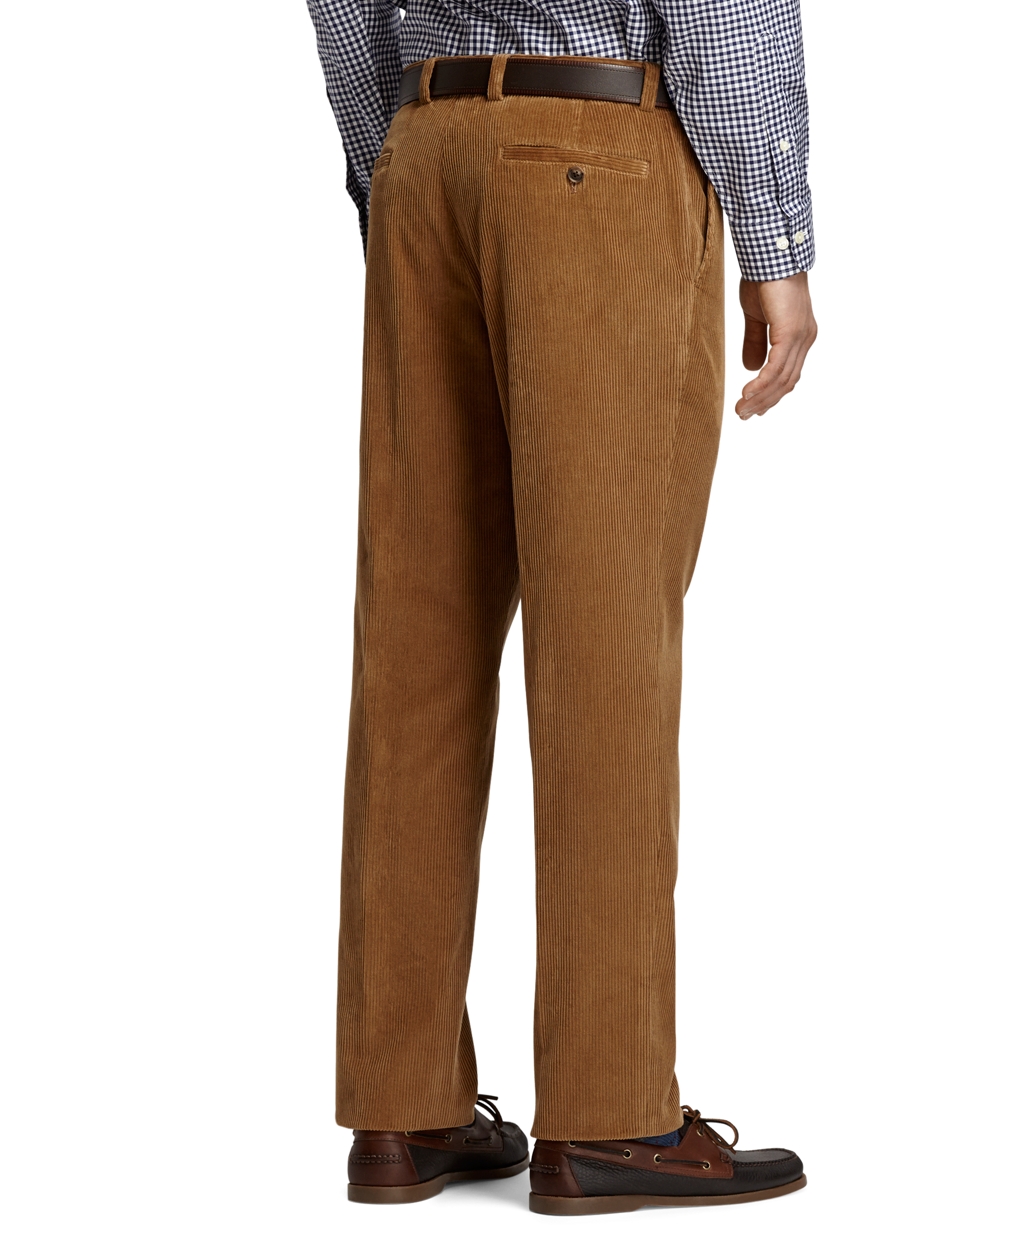 Lyst - Brooks Brothers Milano 8wale Corduroy Pants in Natural for Men